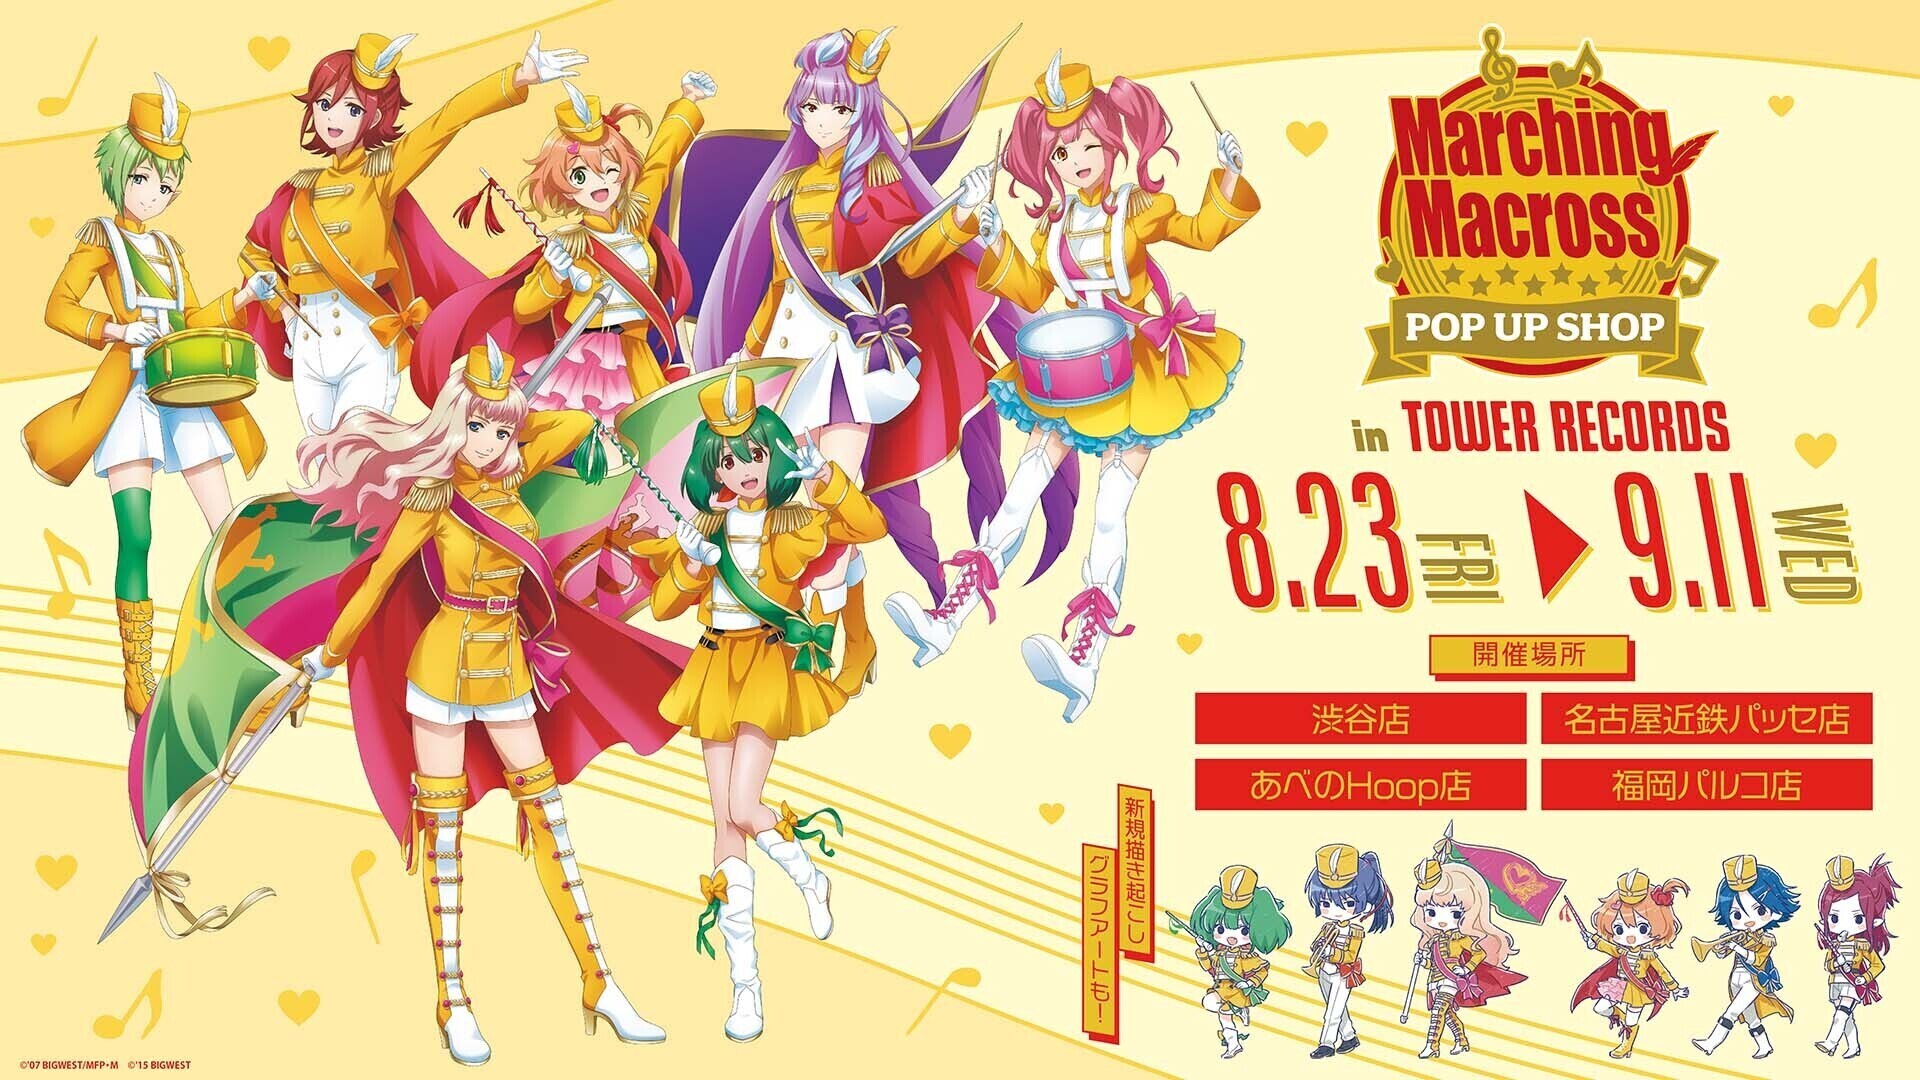 Marching Macross POP UP SHOP in TOWER RECORDS